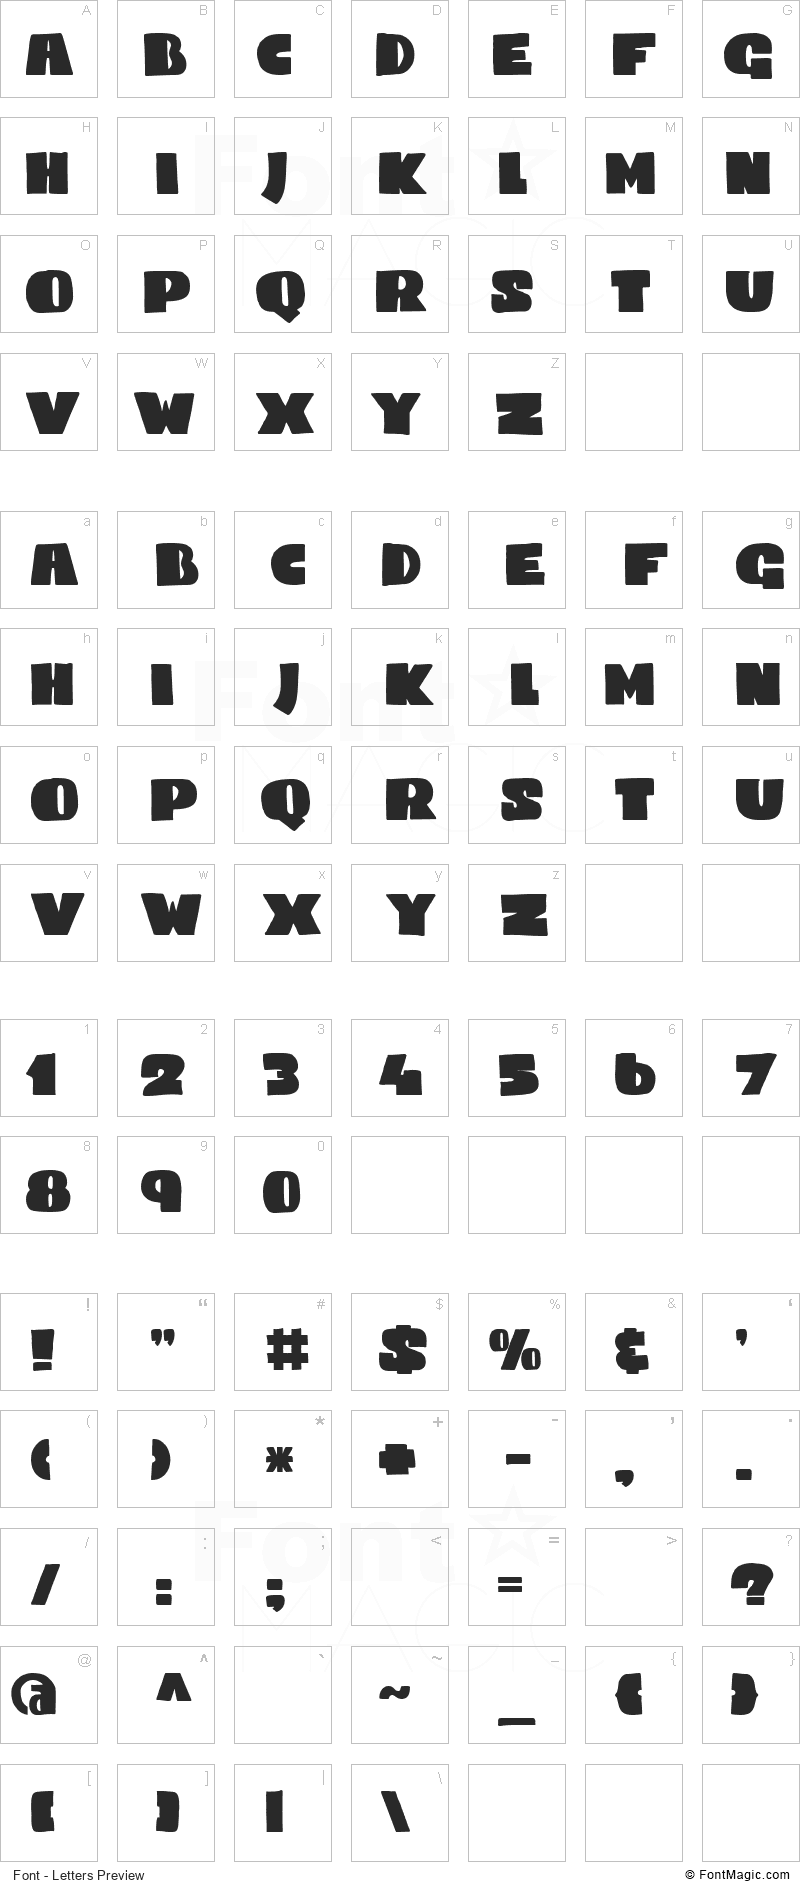 DK Codswallop Font - All Latters Preview Chart